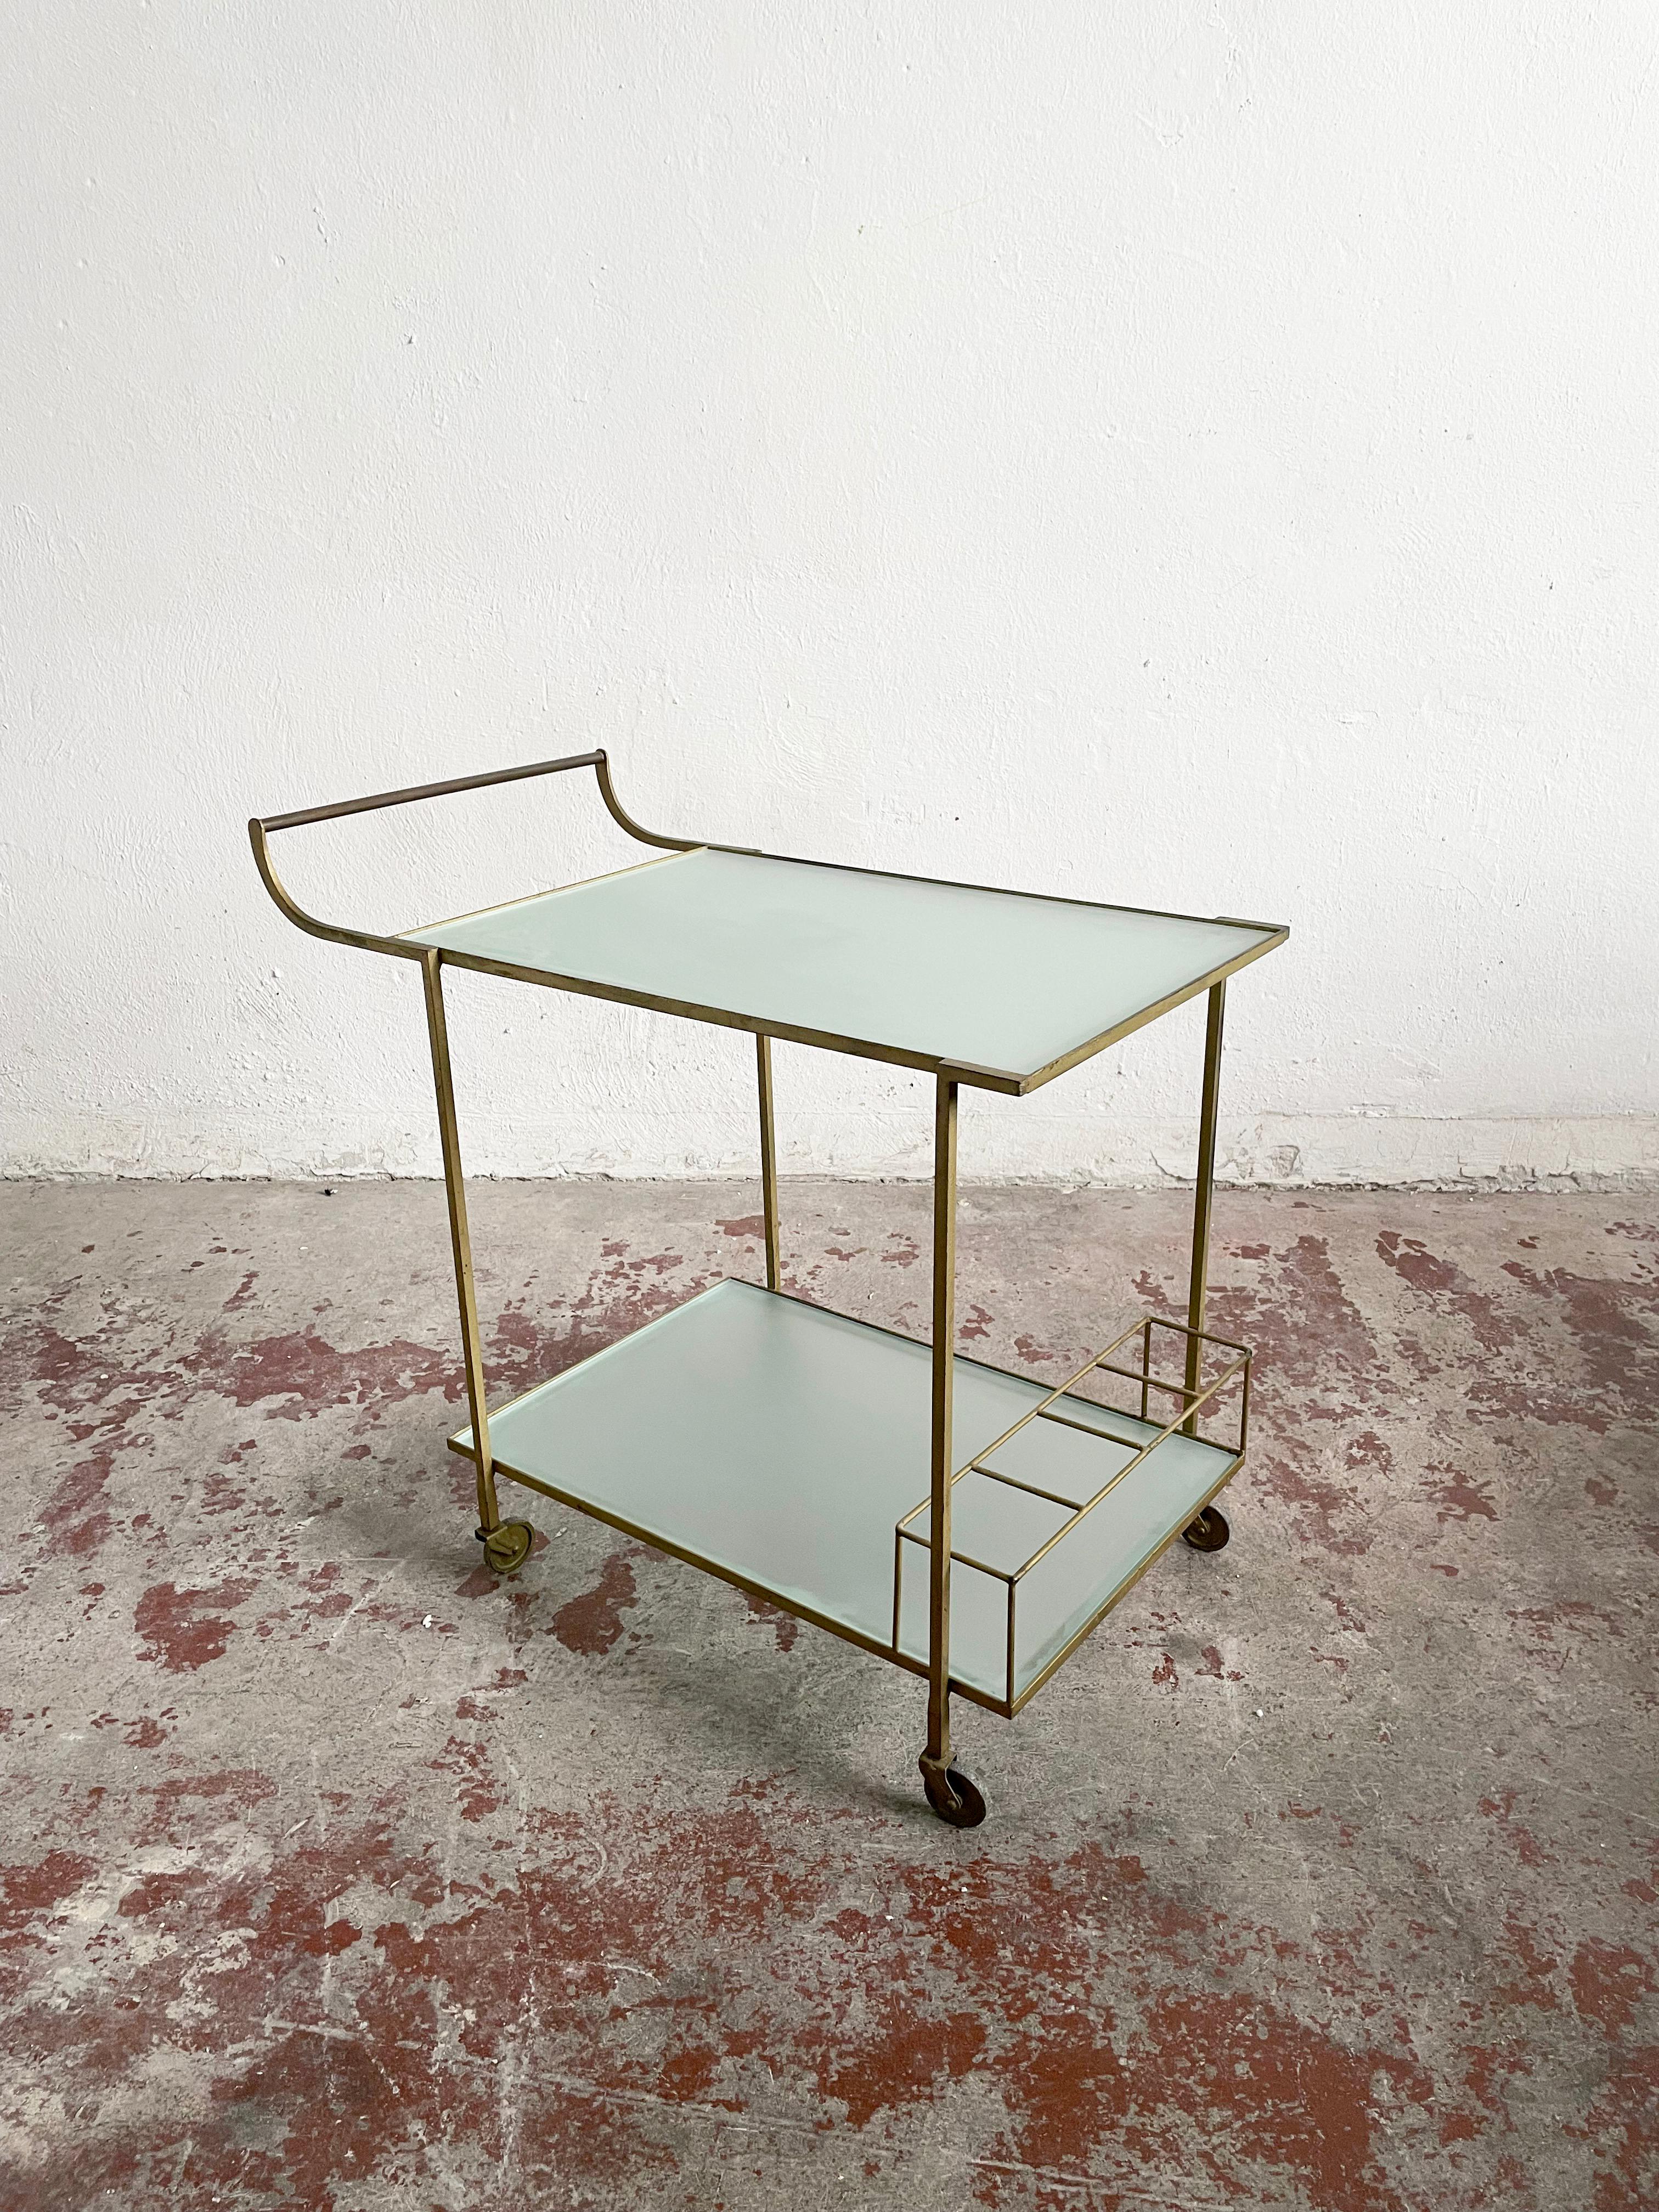 Vintage artisan bar cart in beautiful and stylish minimalist form

Bauhaus design

Year of production: circa the 1930s-1950s

Minimalist metal frame painted in gold colour, rough finish
Two shelves made of frosted glass


Dimensions: